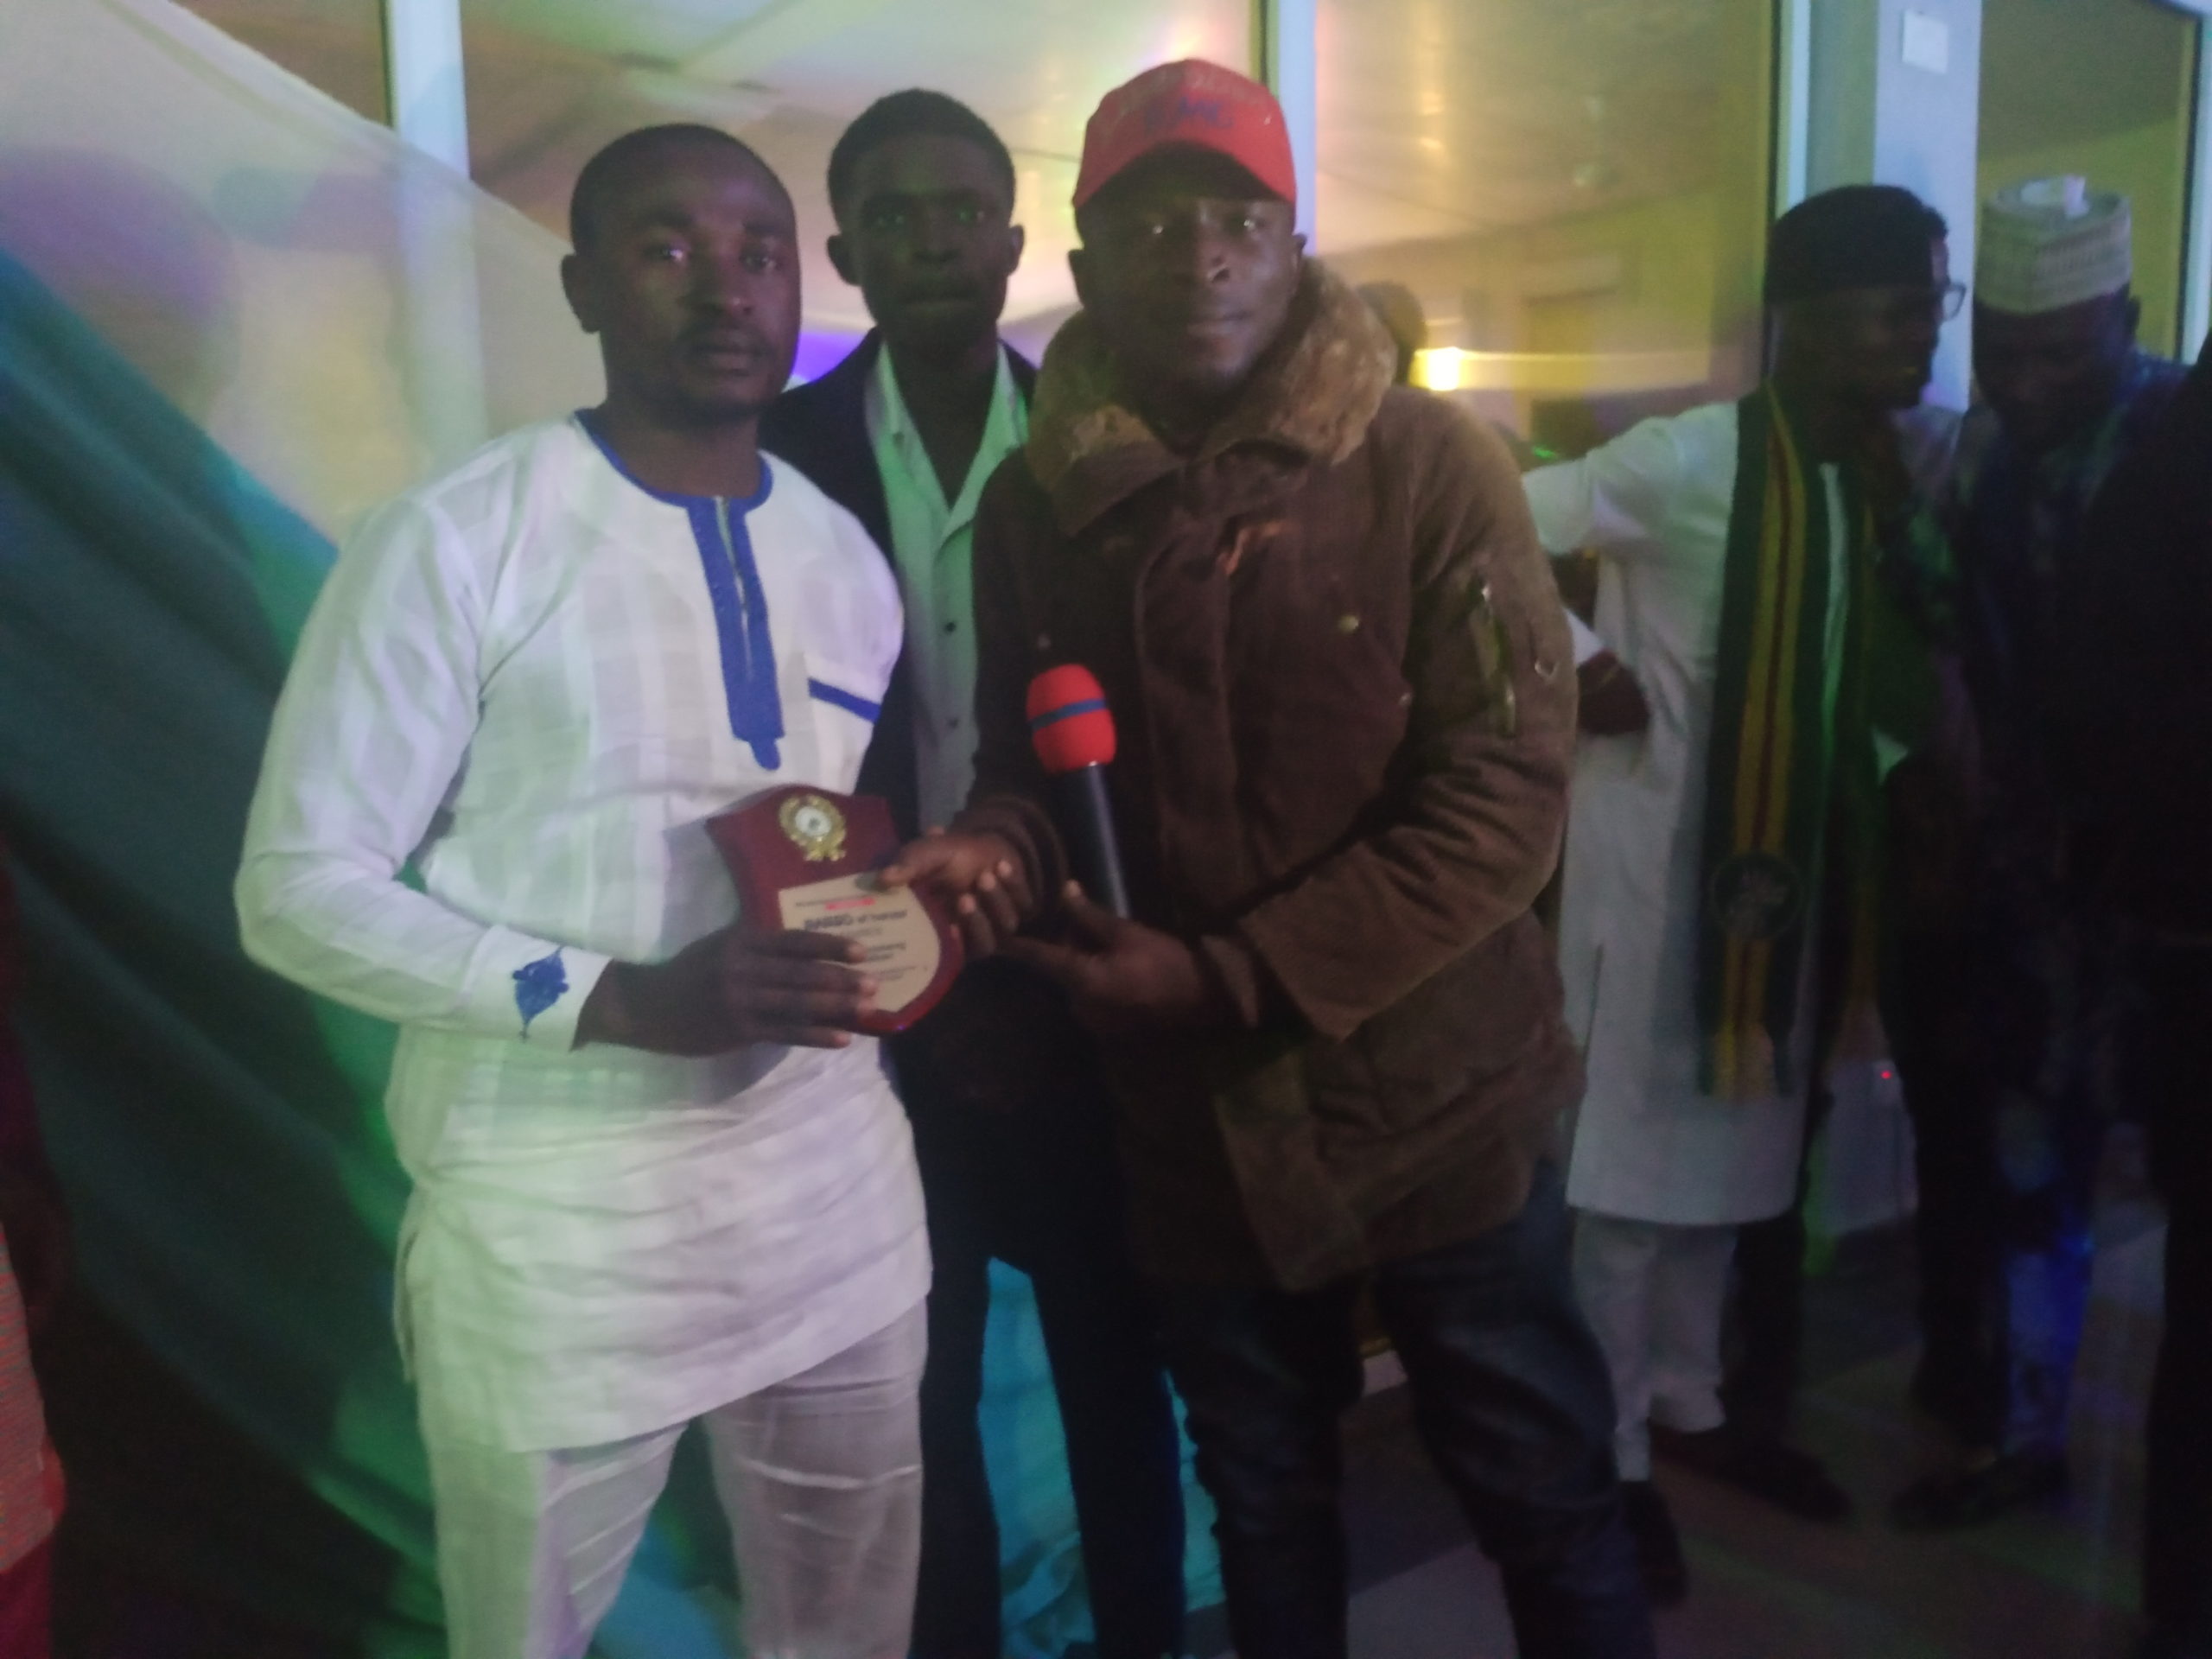 HON. KYESMANG JONATHAN AWARDED AS THE IRON PILLAR OF STUDENTS 2020 BY NATIONAL ASSOCIATION OF MWAGHAVUL STUDENTS (NAMS)